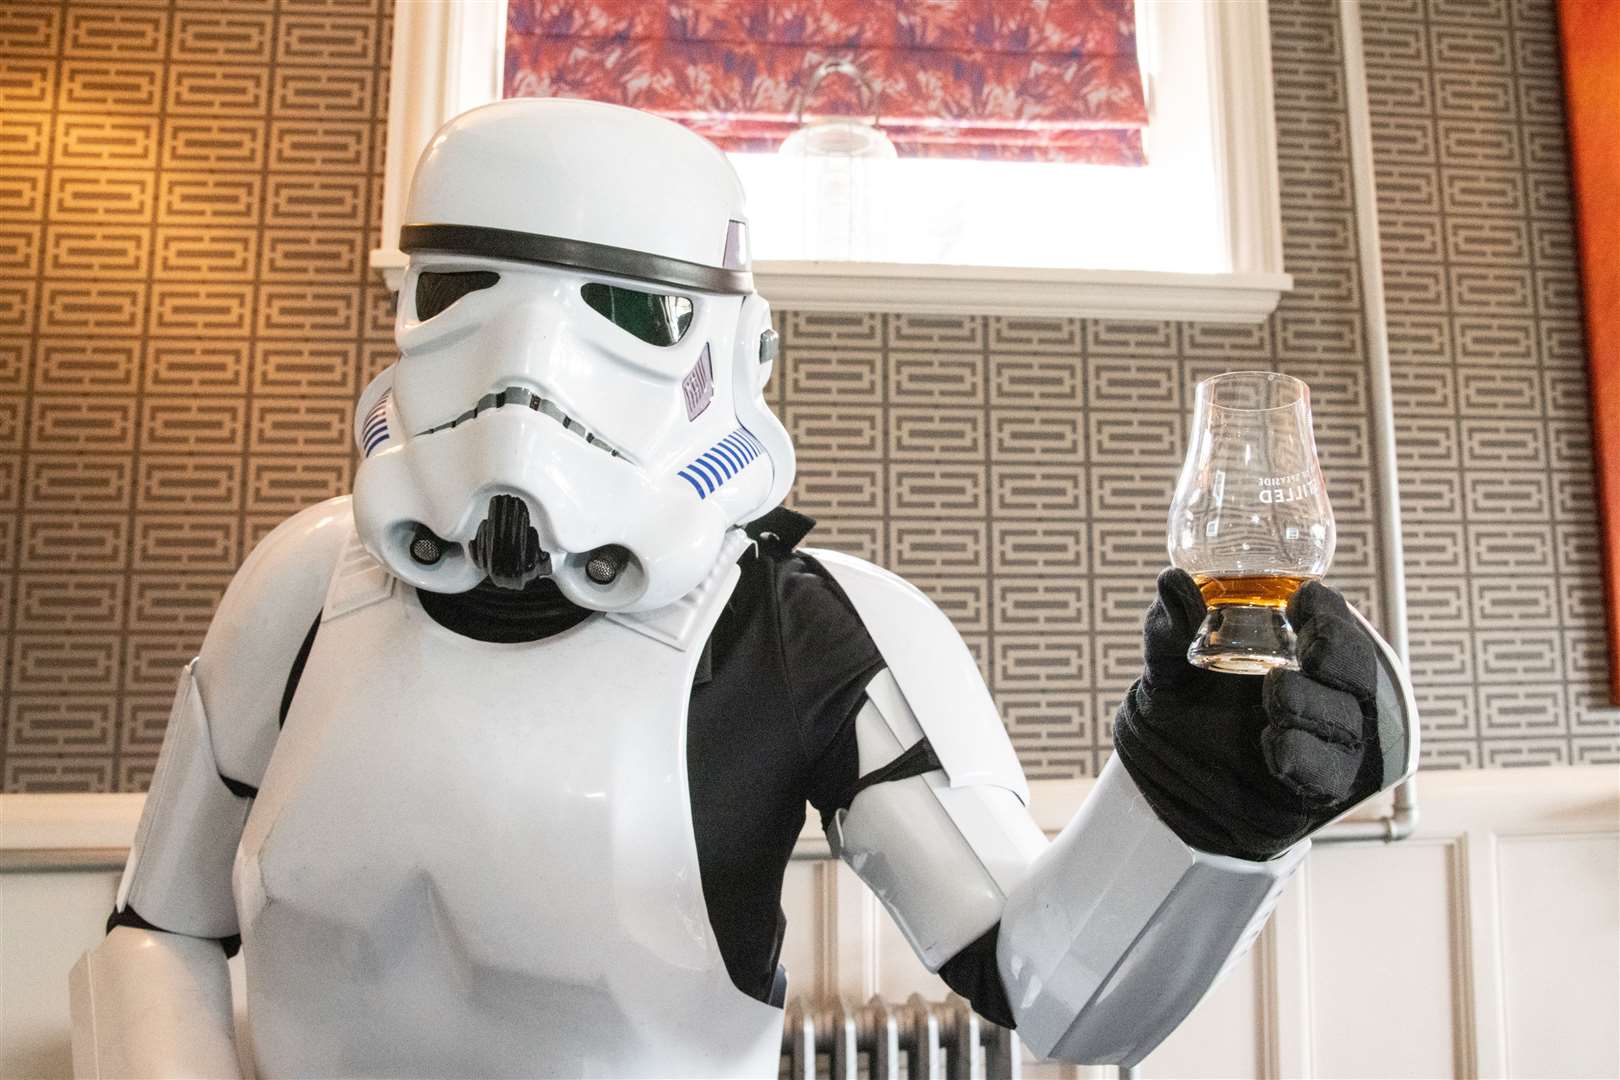 Iain Allan from Glen Moray who dressed as a Stormtrooper. Picture: Daniel Forsyth